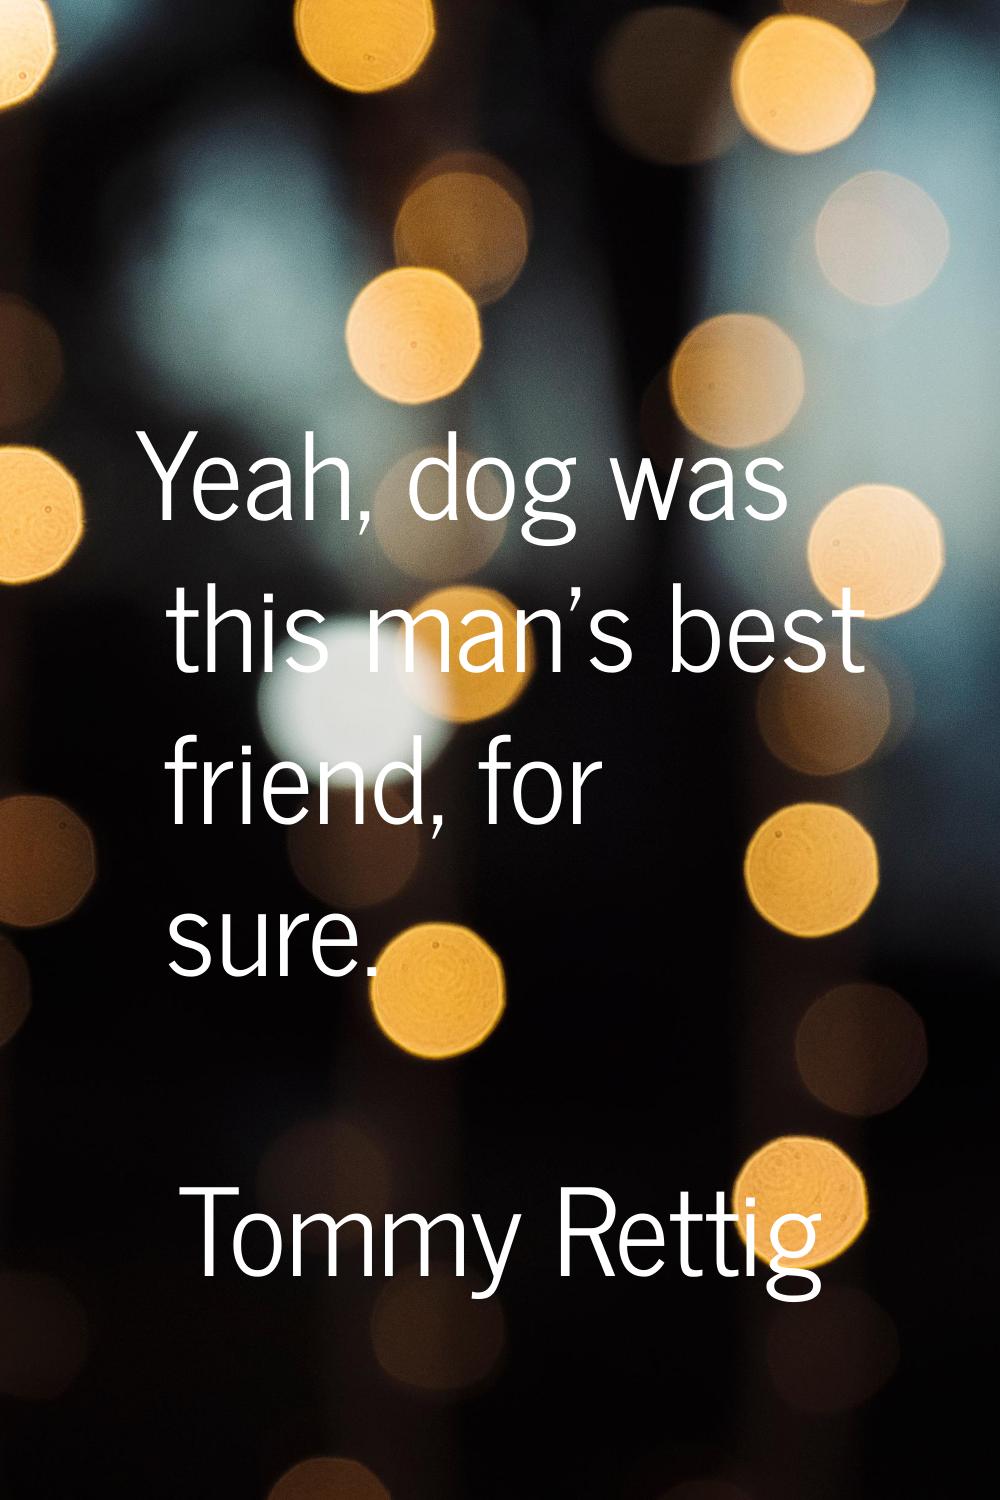 Yeah, dog was this man's best friend, for sure.